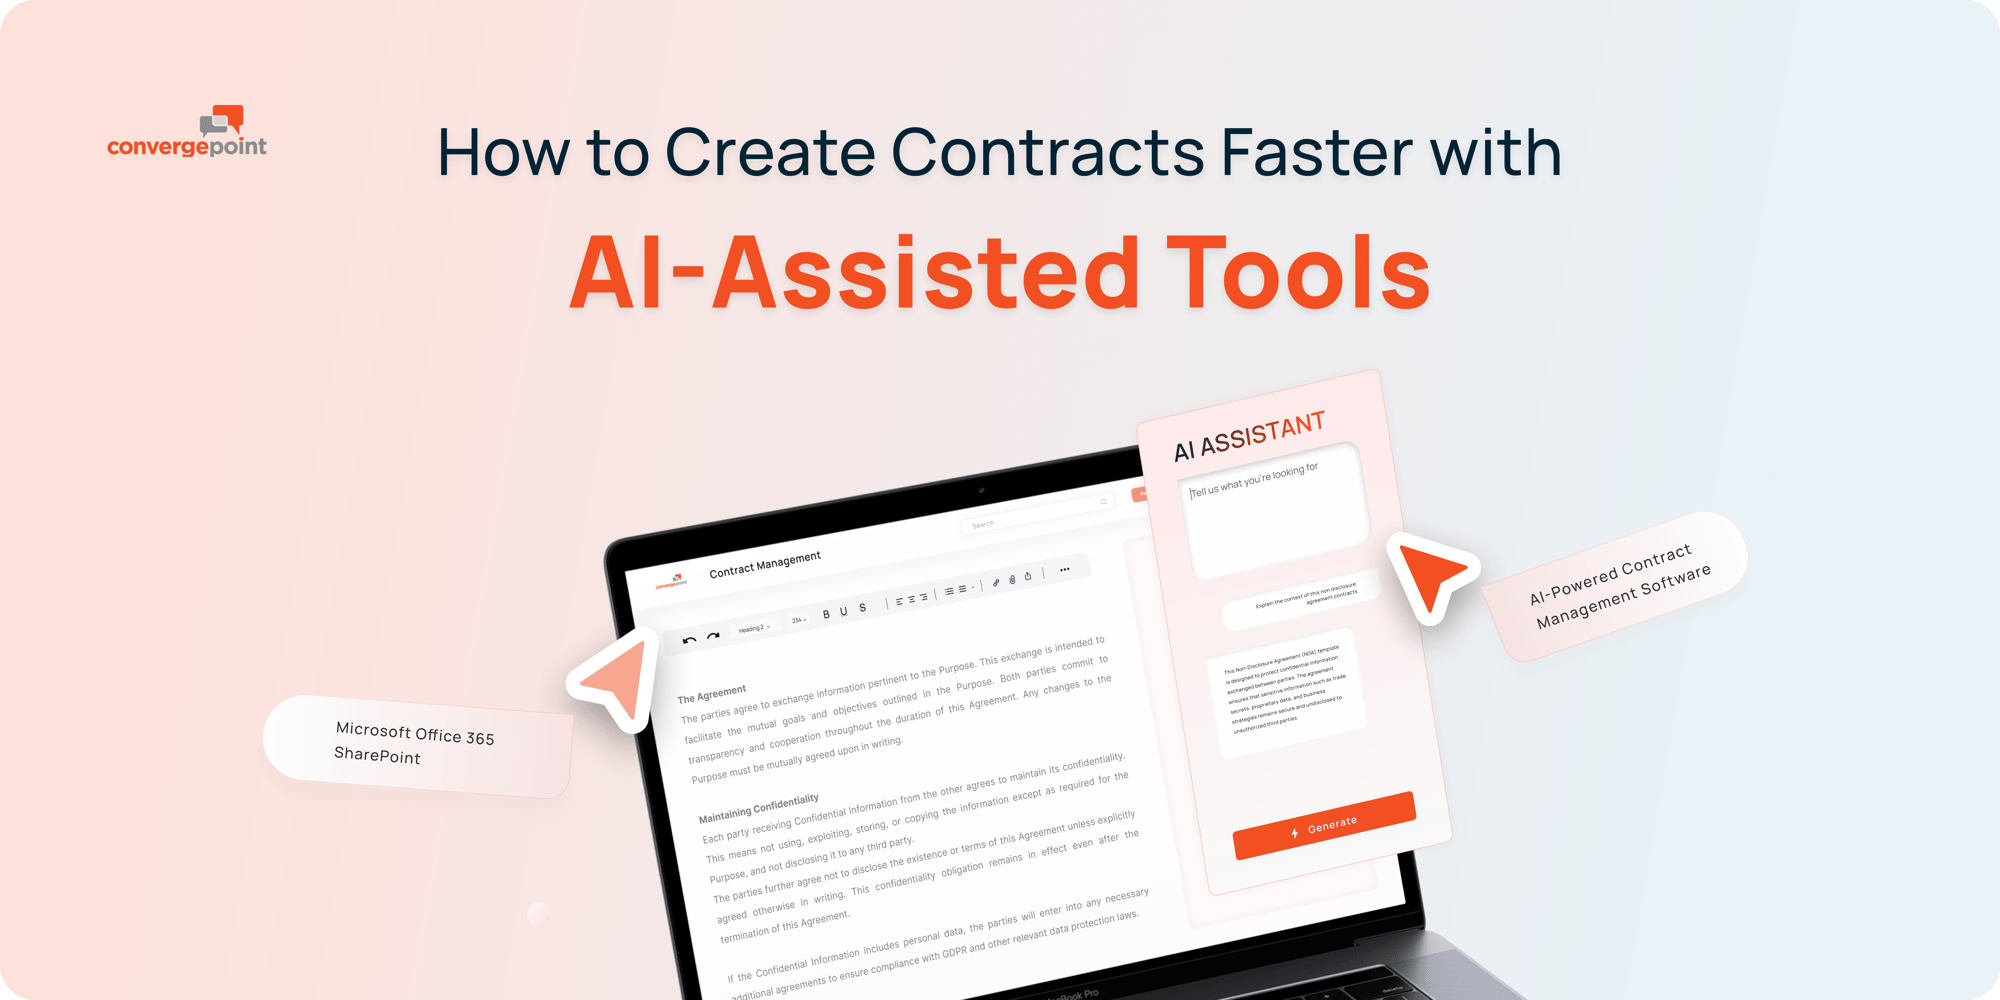 How to Create Contracts Faster with AI-Assisted Tools